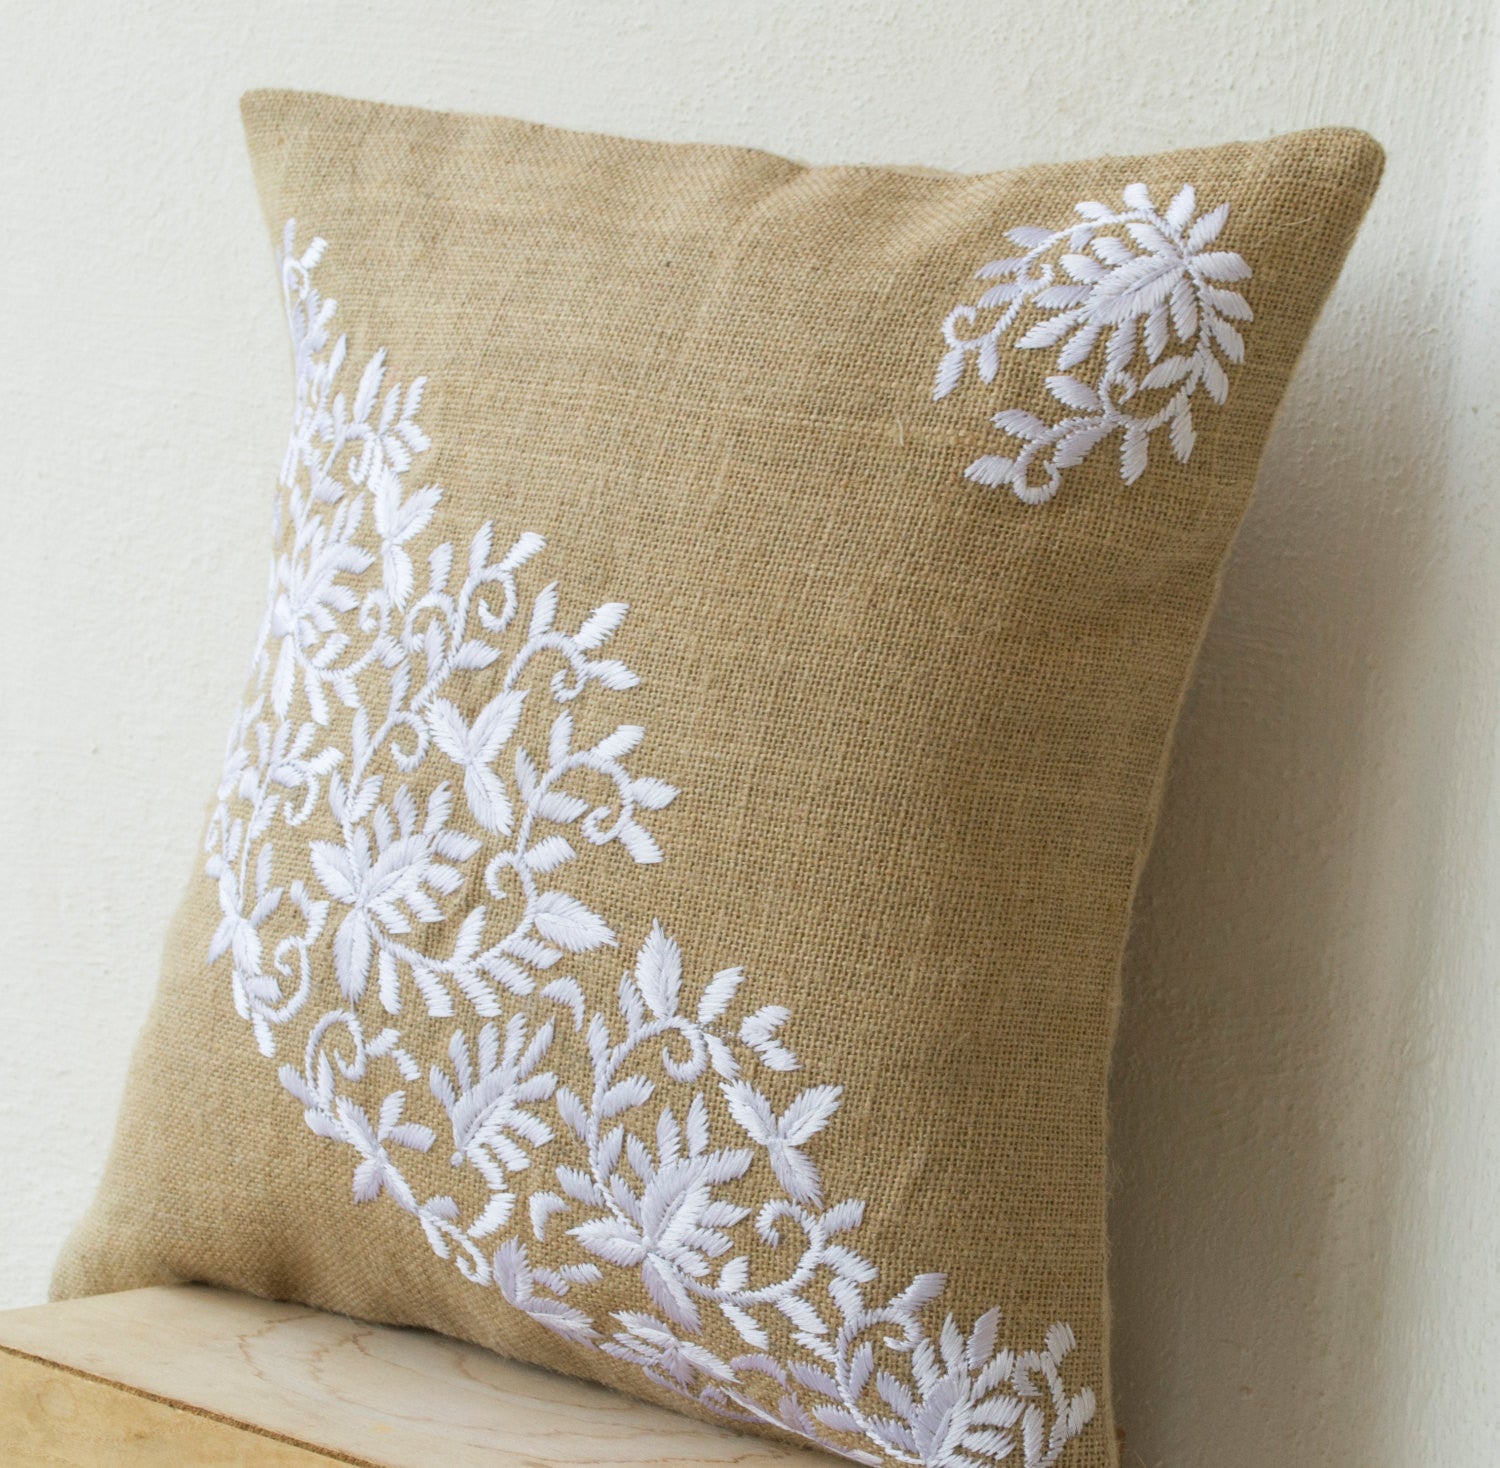 Handmade burlap pillows with white flower leaves embroidery